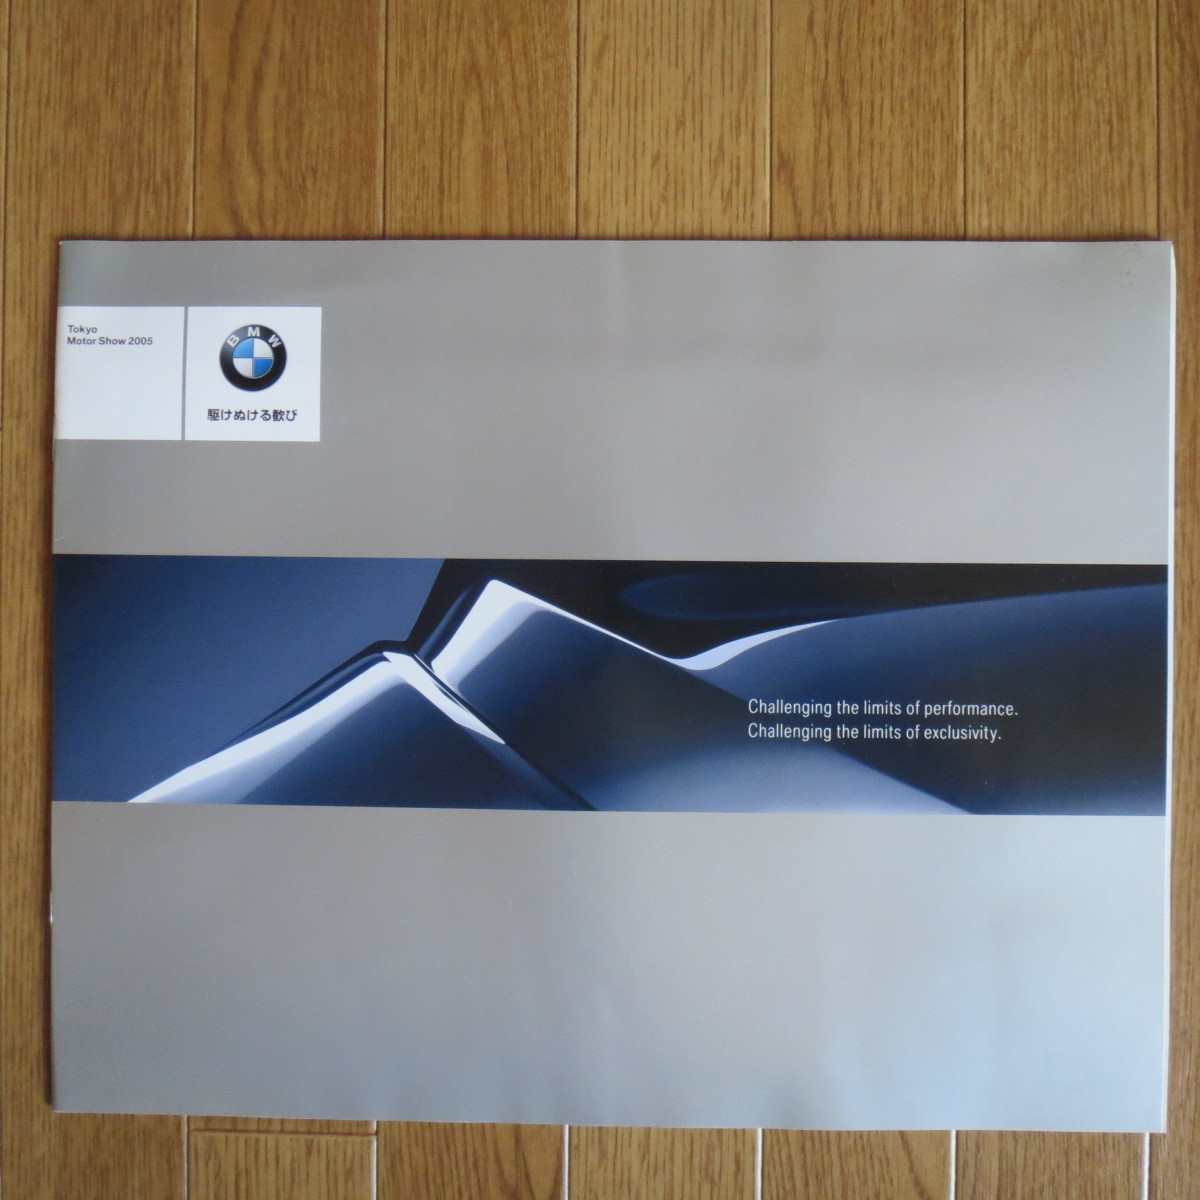 BMW pamphlet no. 39 times Tokyo Motor Show 2005*MS0520